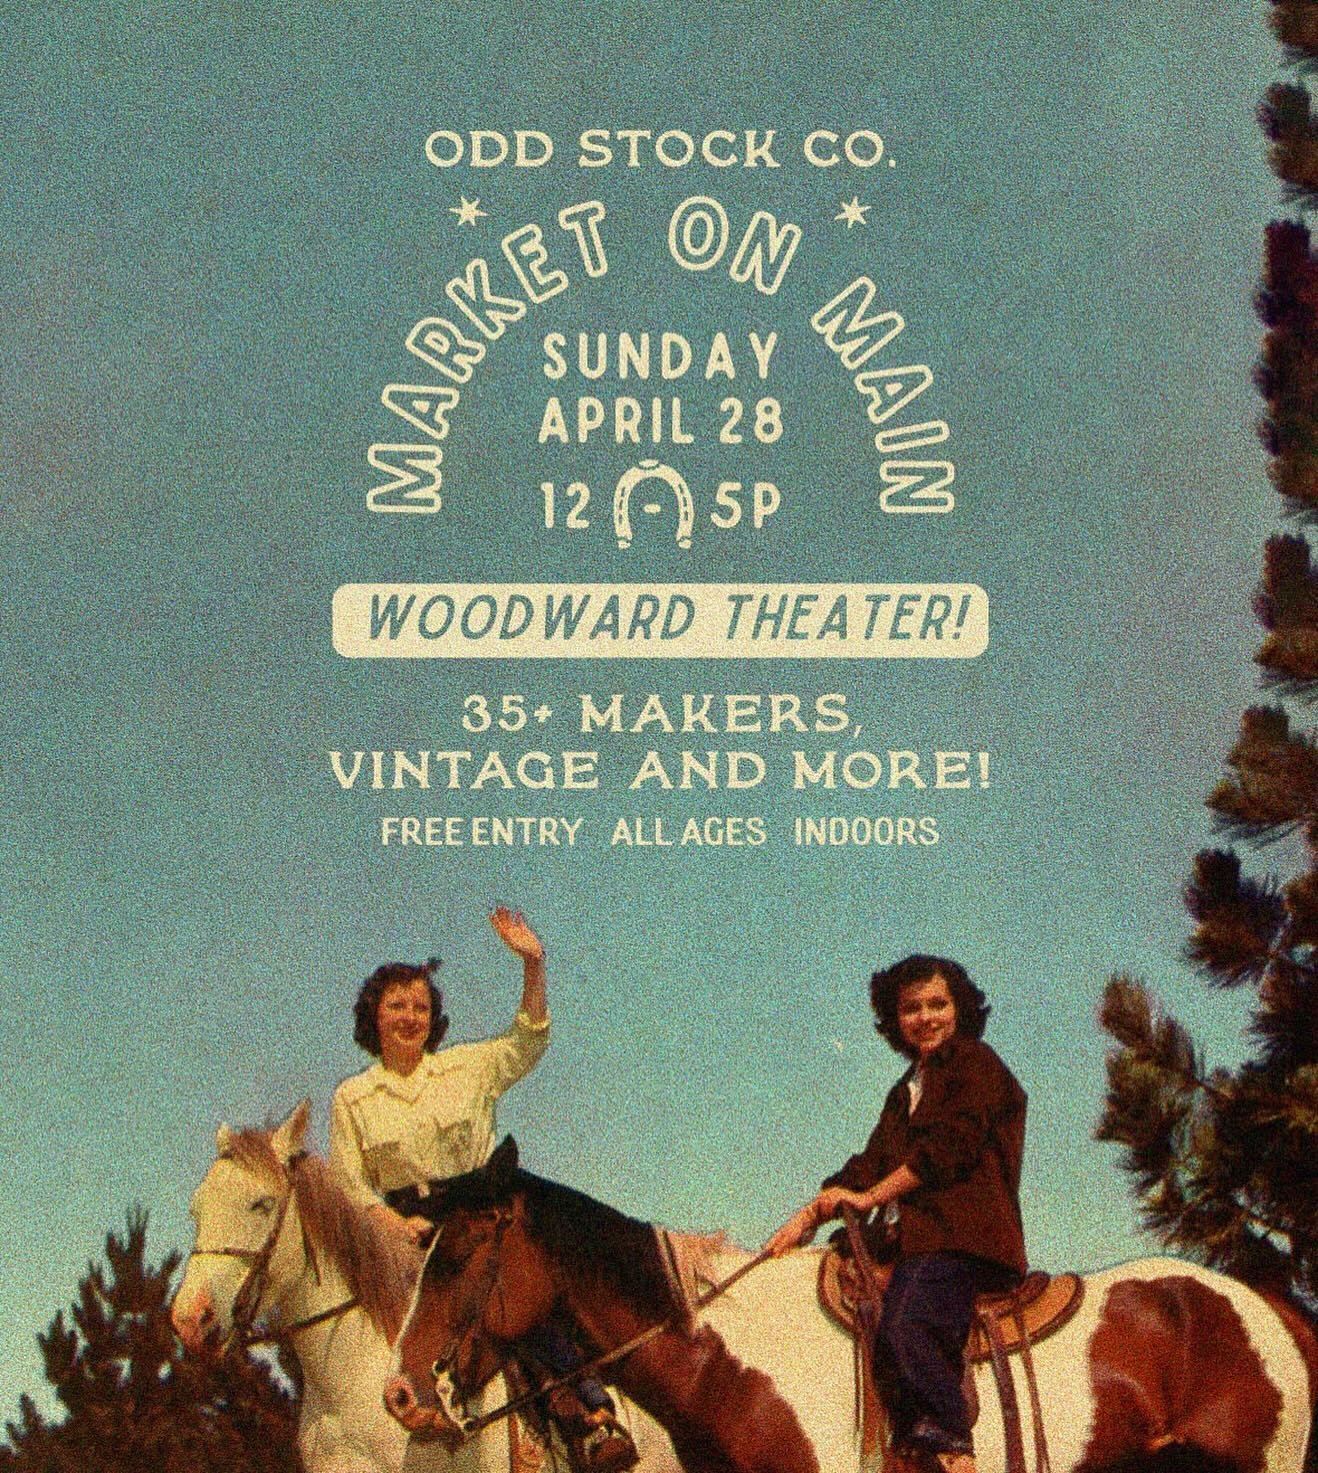 Sunday April 28th I&rsquo;ll be setting up at Market on Main with 35+ makers, vintage vendors, food and more! Located in the wonderful @woodwardtheater noon-5pm